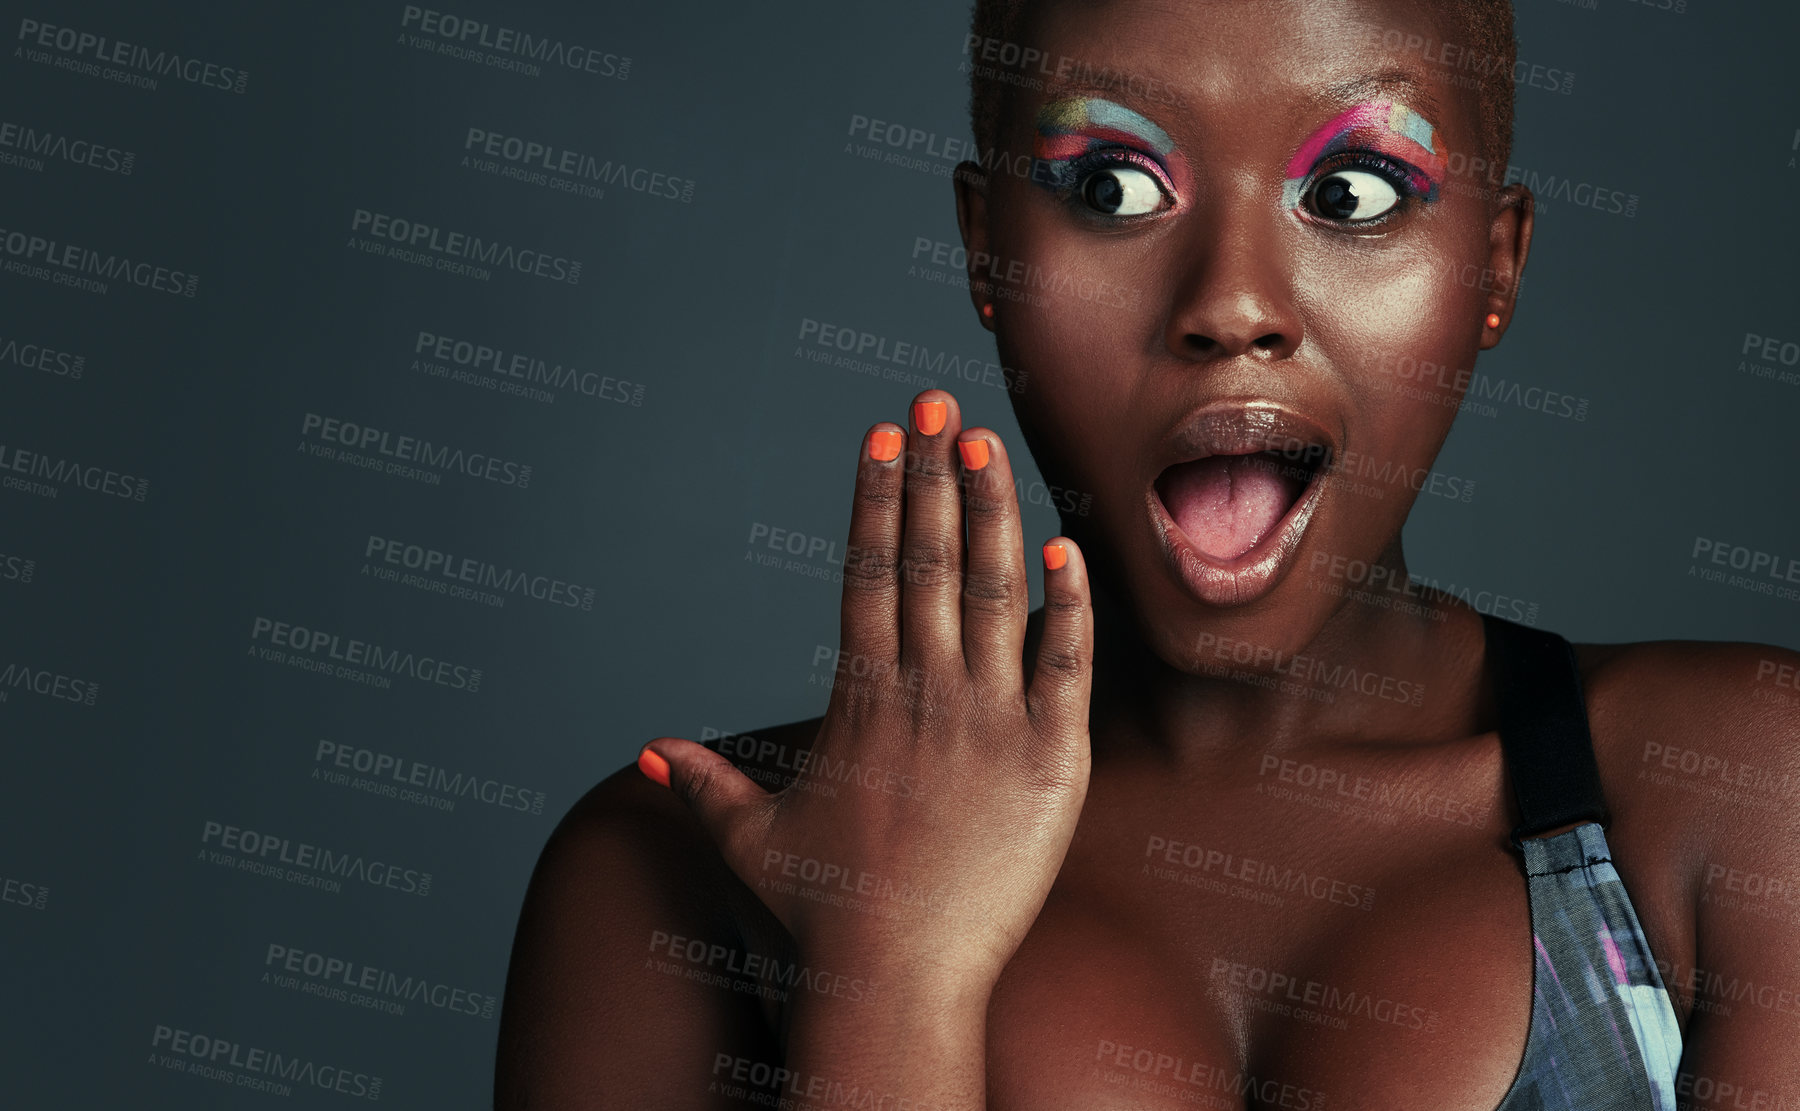 Buy stock photo Shot of a beautiful young woman looking surprised while posing against a grey background